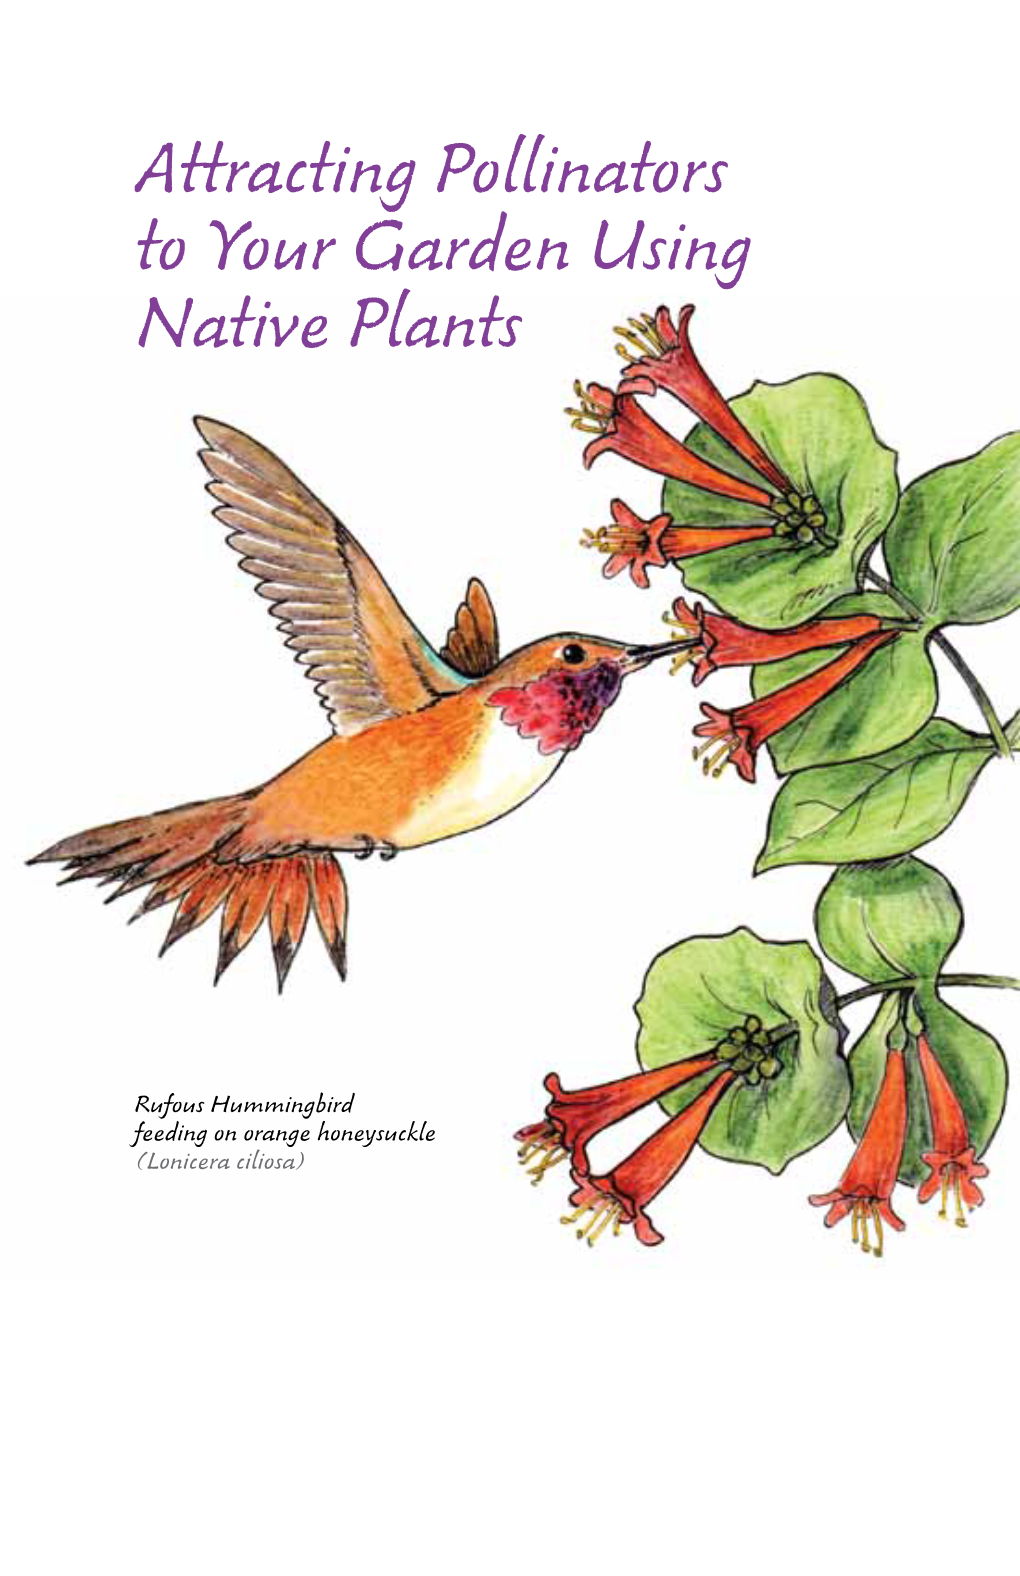 Attracting Pollinators with Native Plants